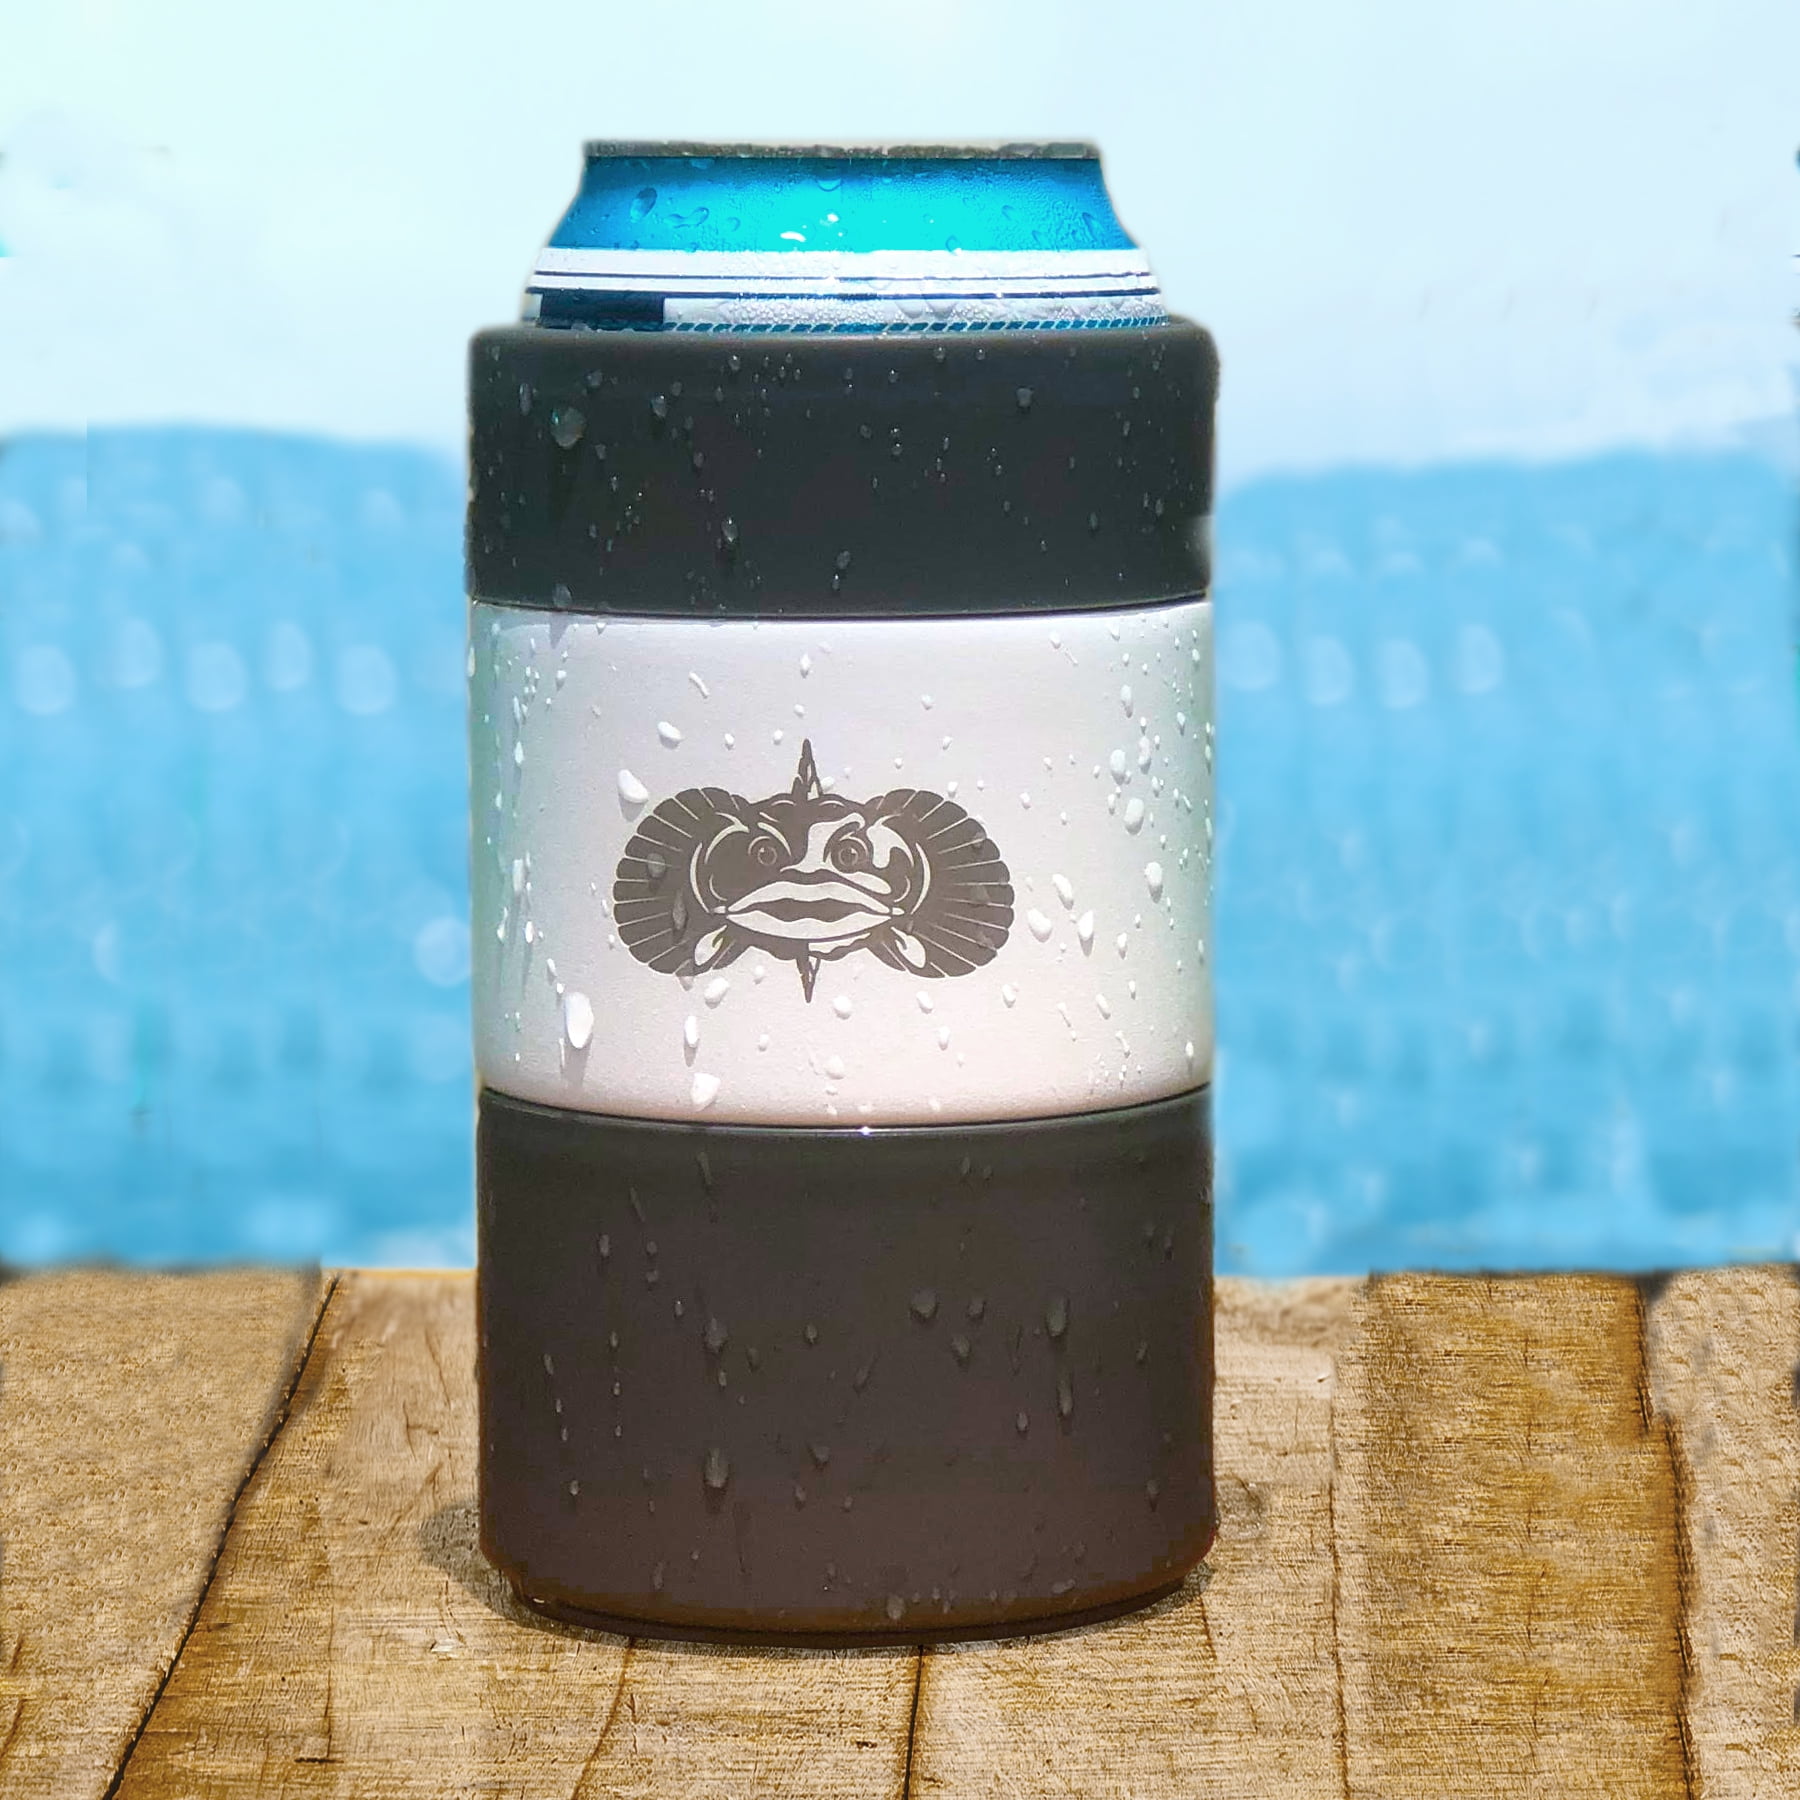 Toadfish Non-Tipping Can Cooler - Black - TackleDirect